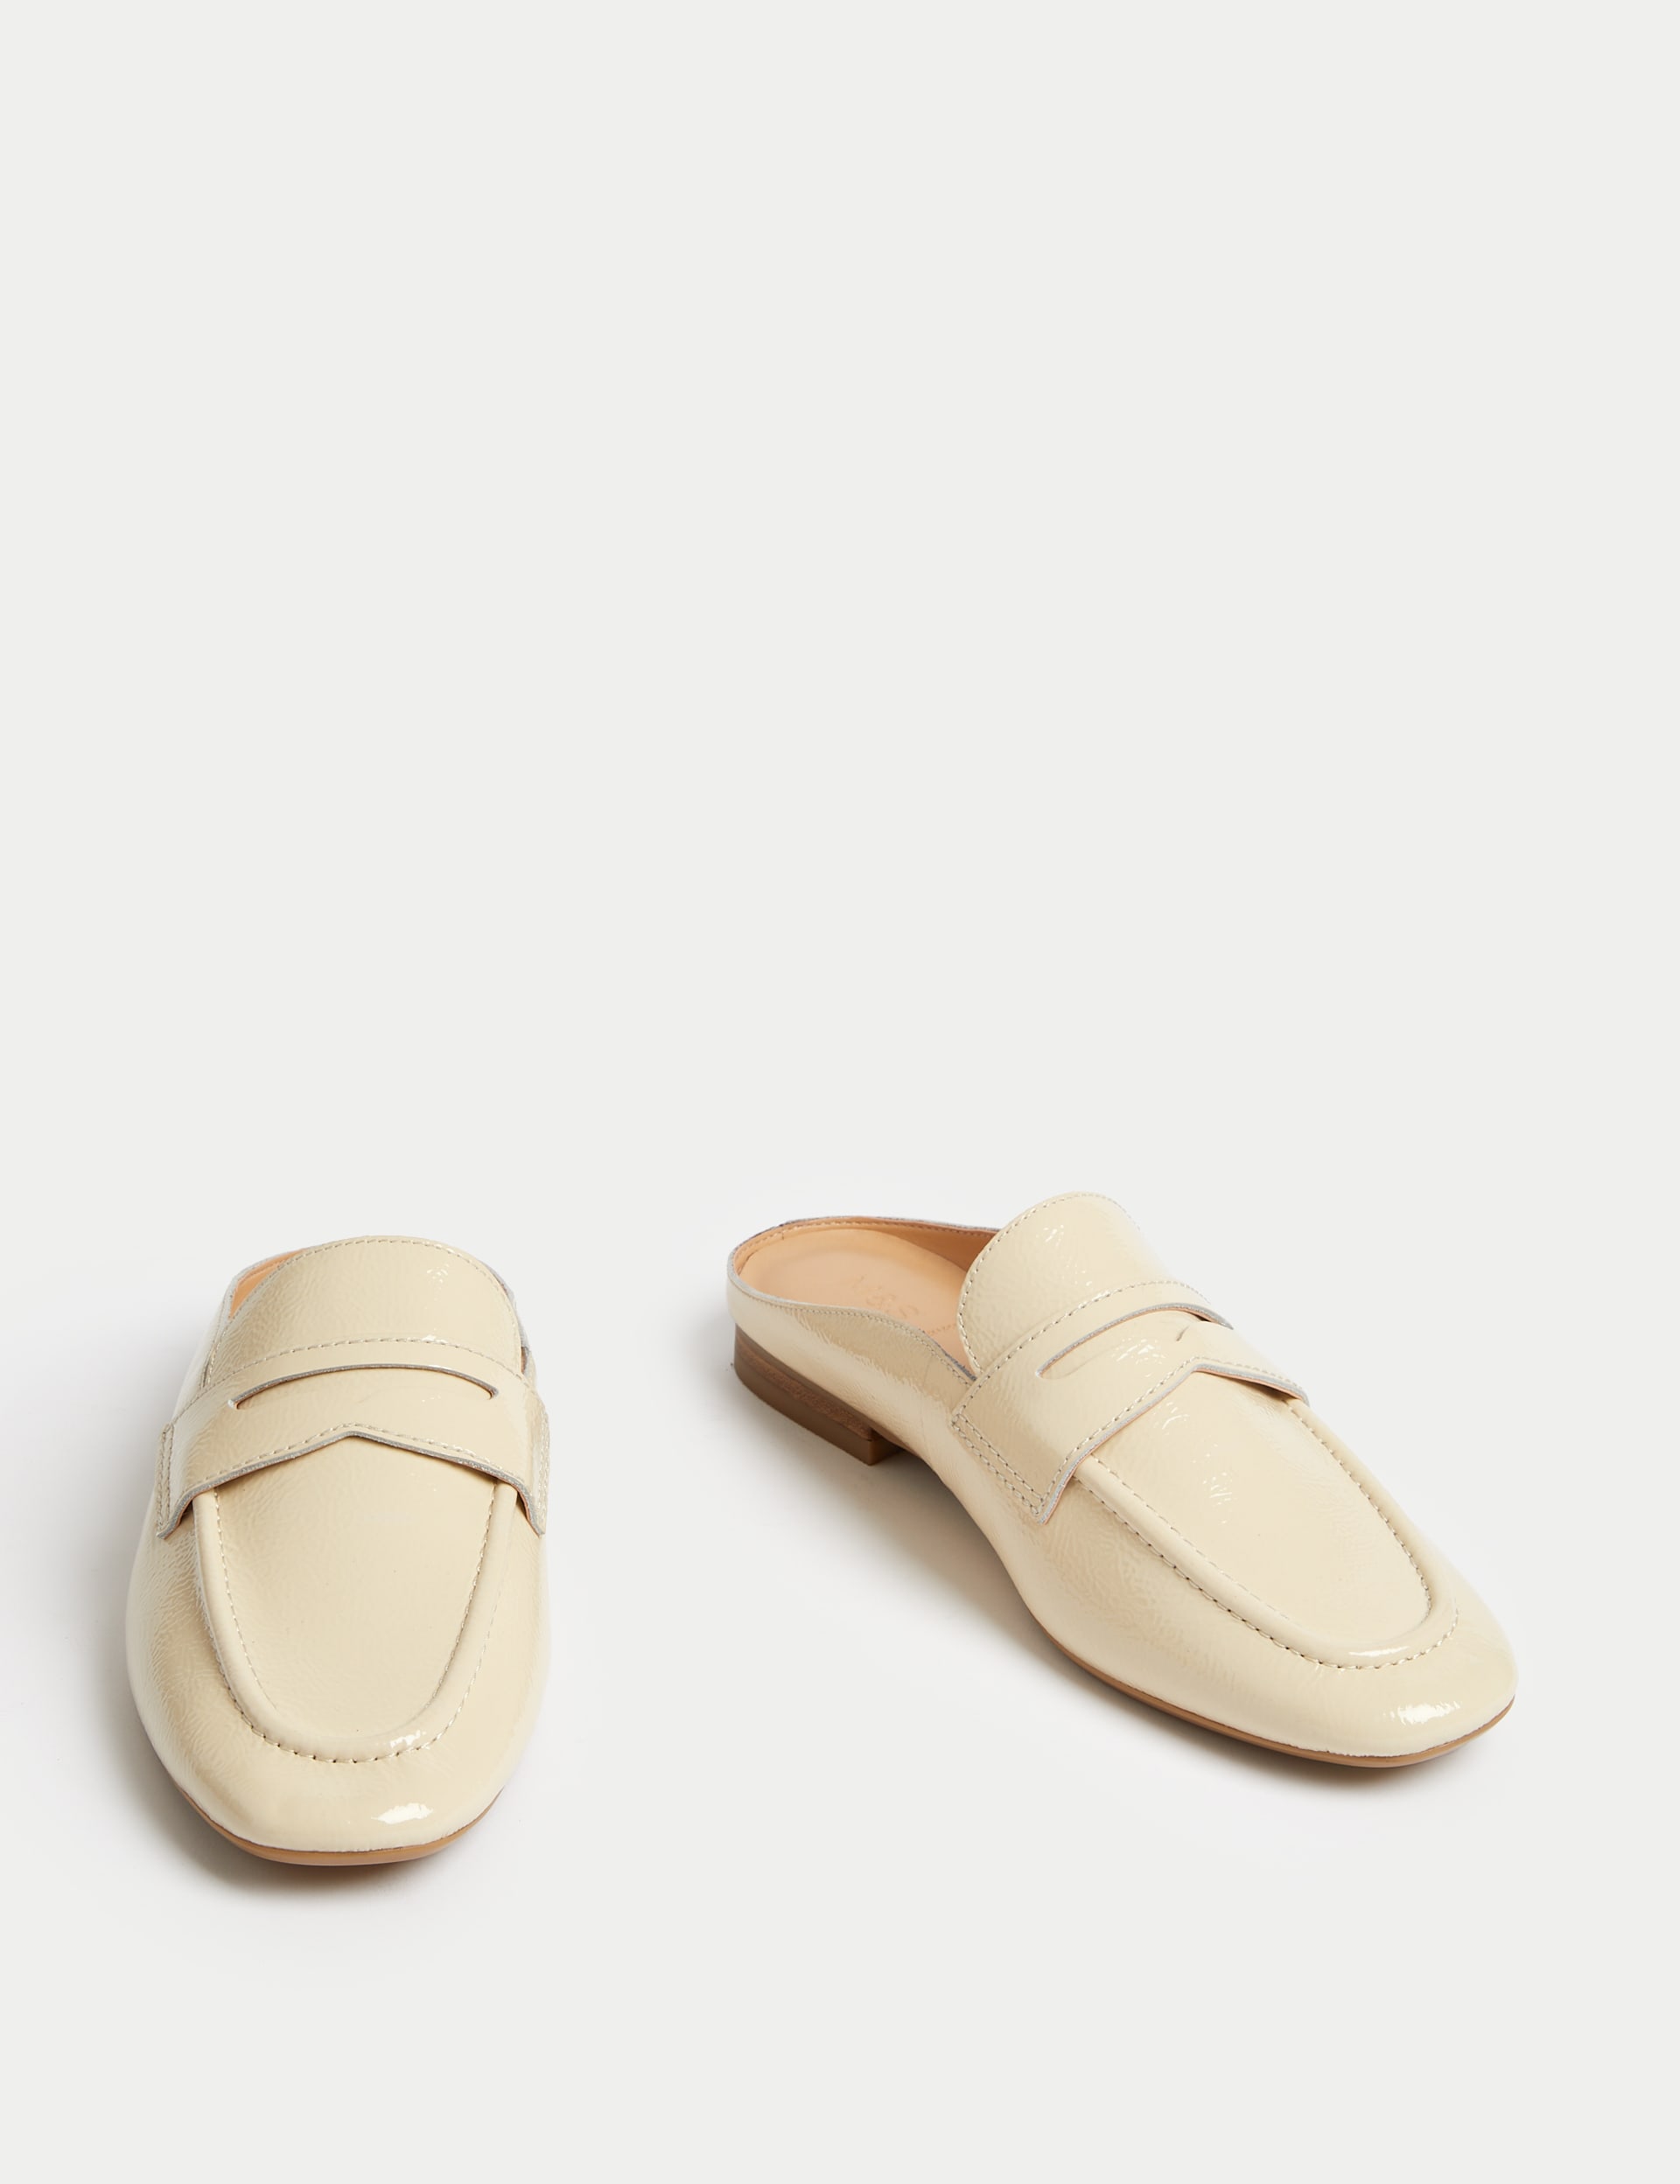 Leather Slip On Flat Loafer Mules